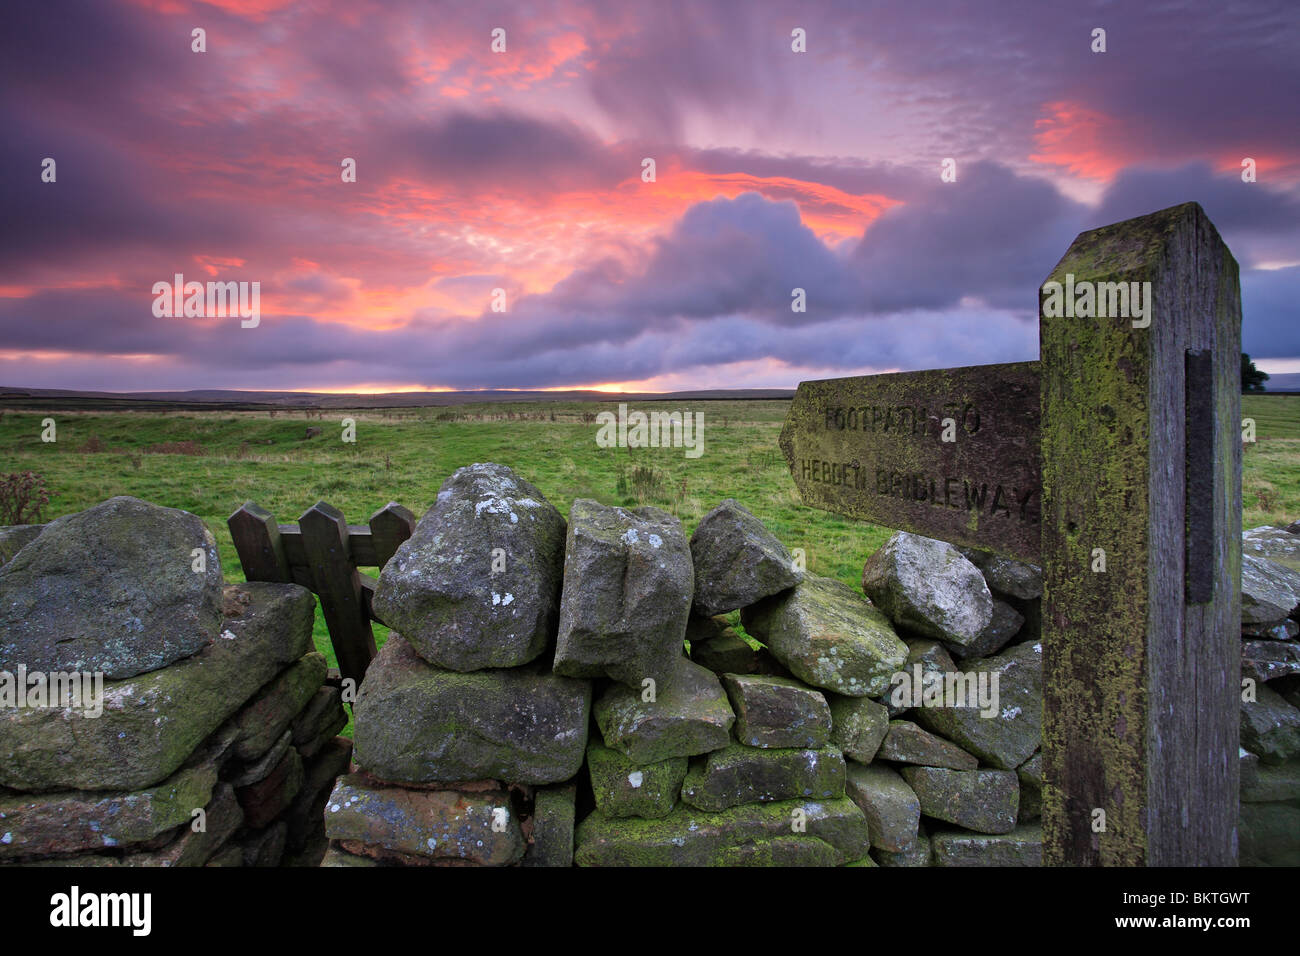 A signpost marks the way toward the Hebden Bridleway near Grassington in the Yorkshire Dales of England Stock Photo